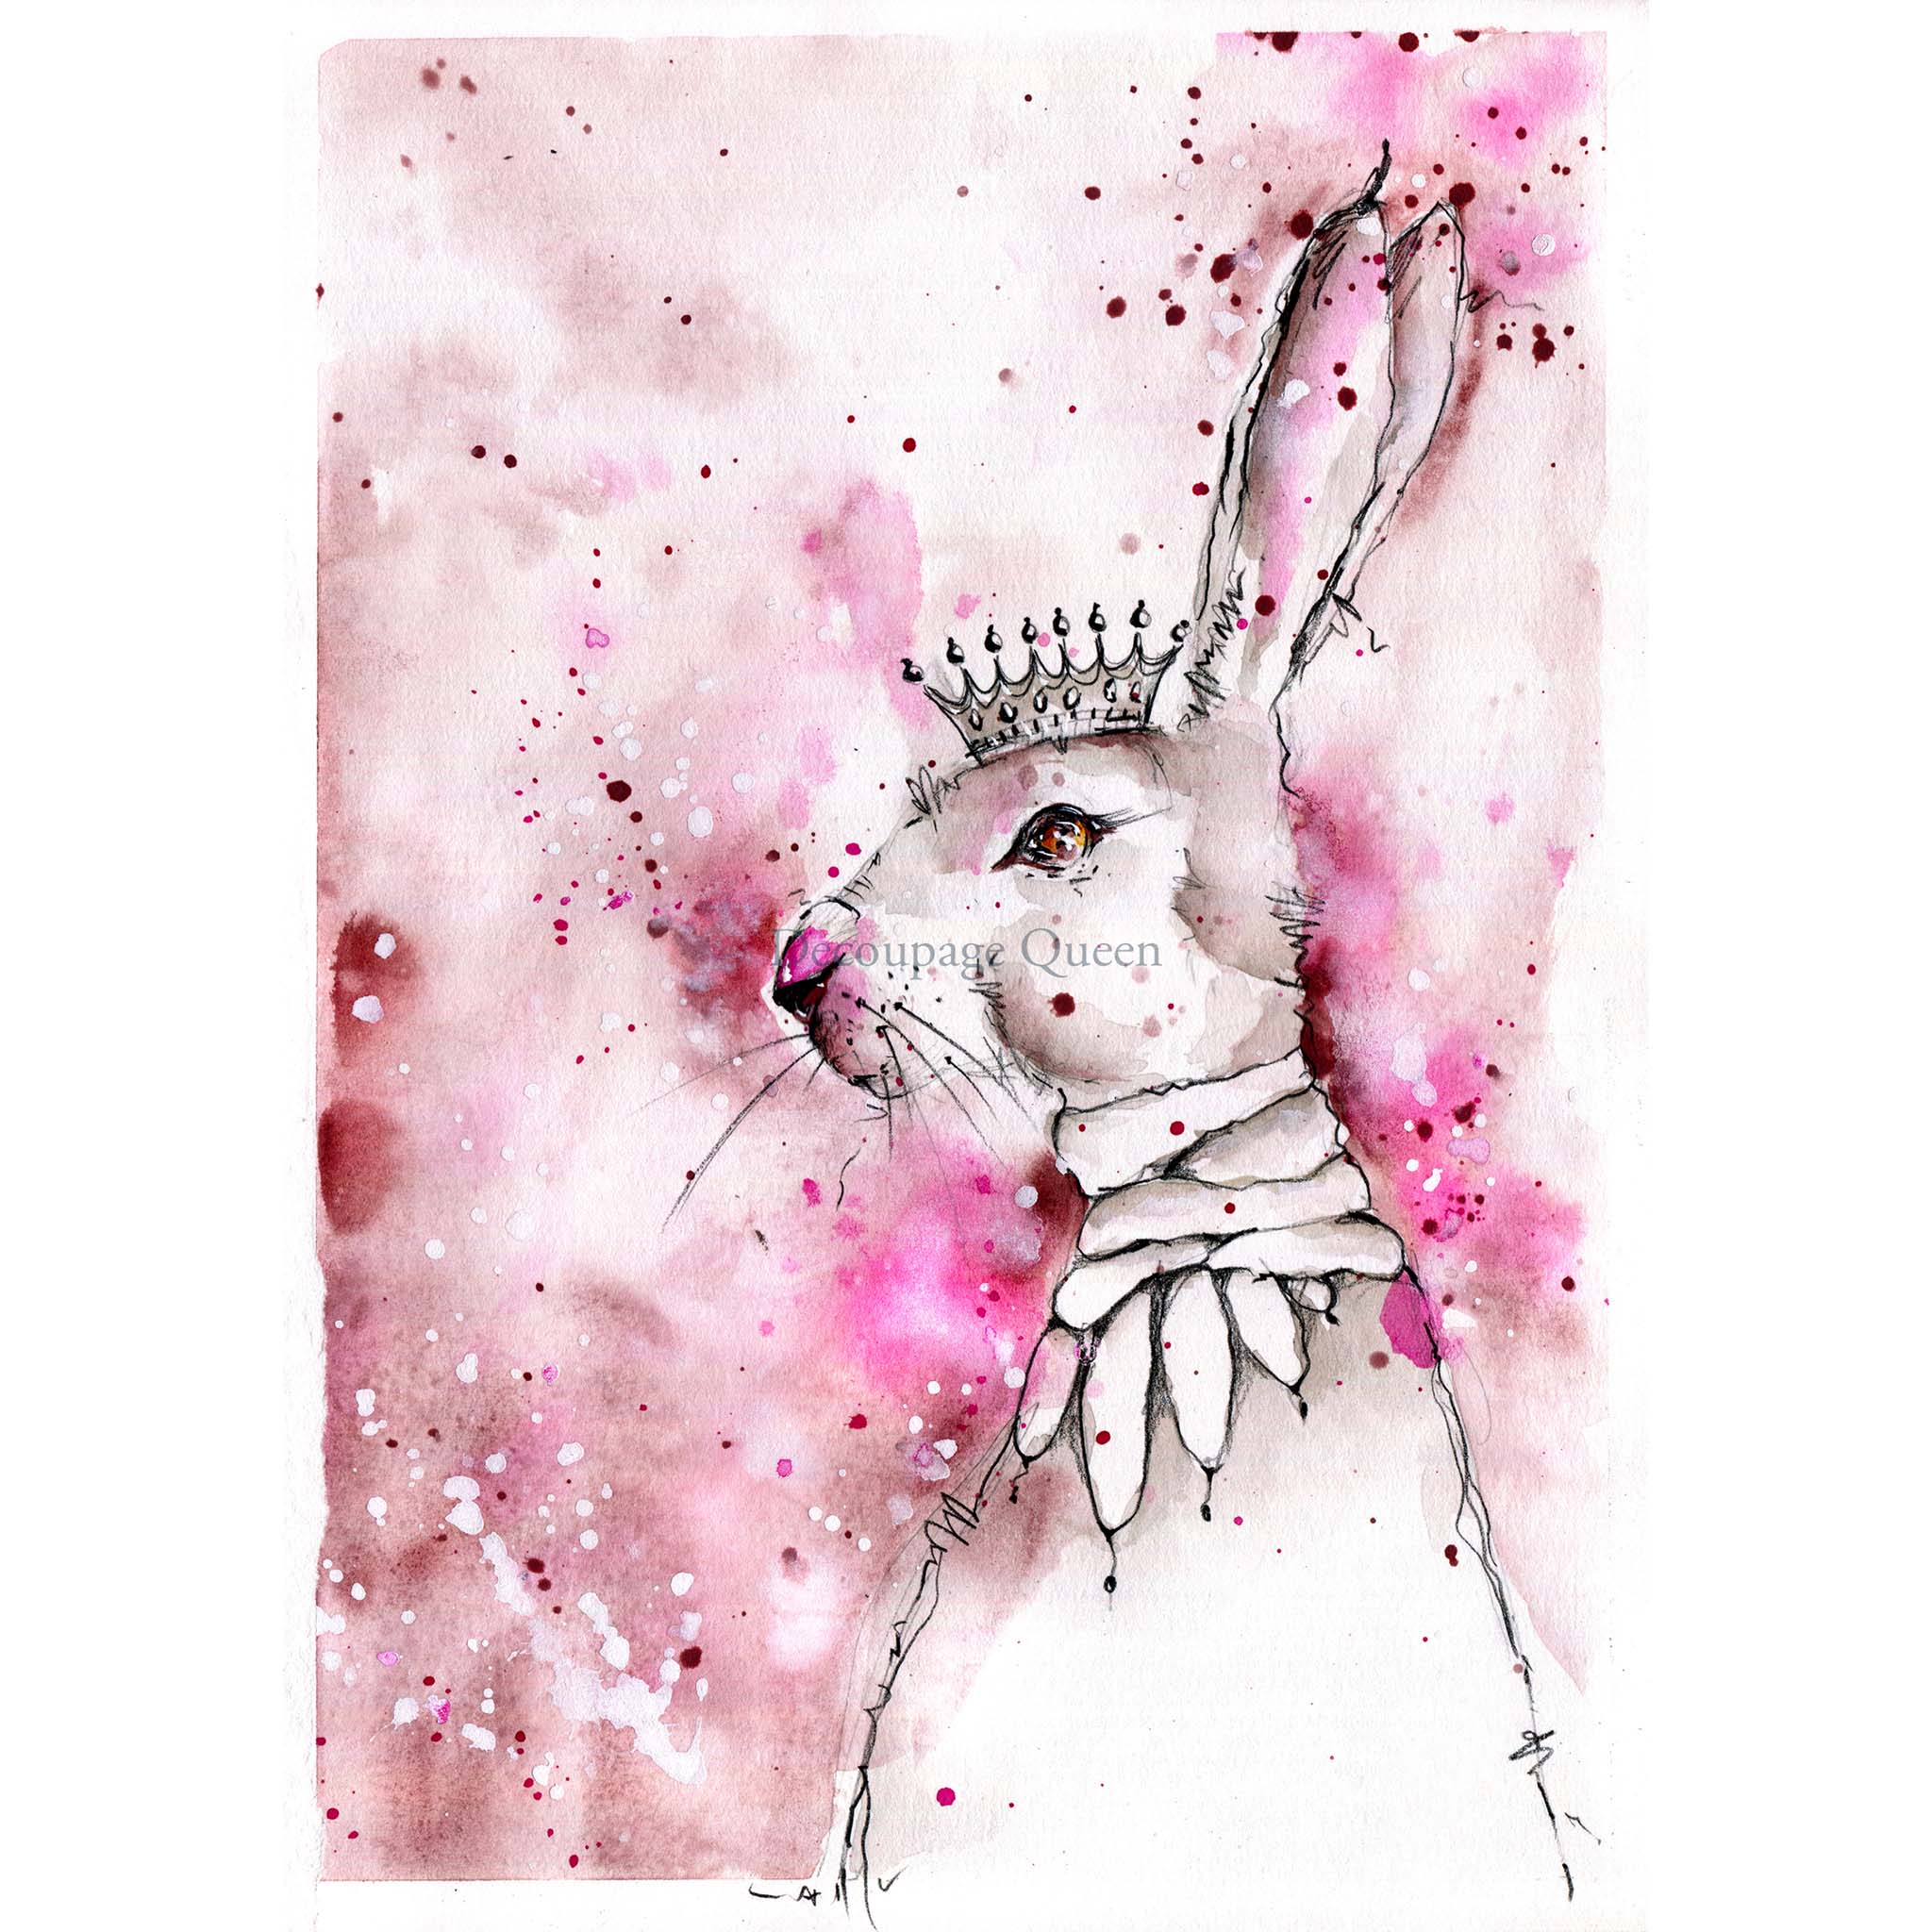 A4 rice paper that features a pink watercolor background and a charming white rabbit wearing a crown and necklace is against a white background.